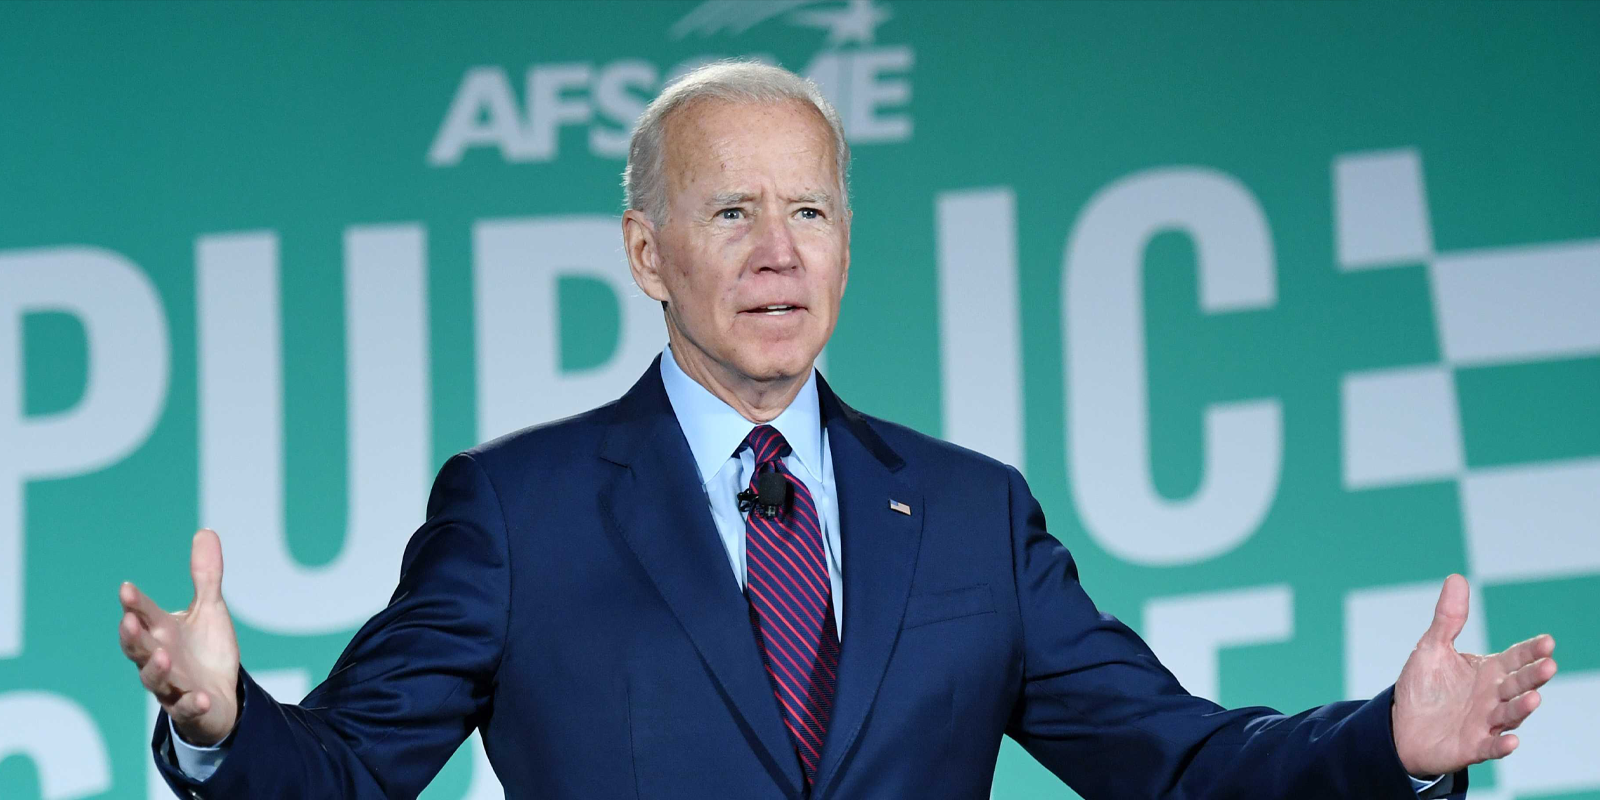 AFSCME praises, honors Joe Biden after president ends his reelection campaign 